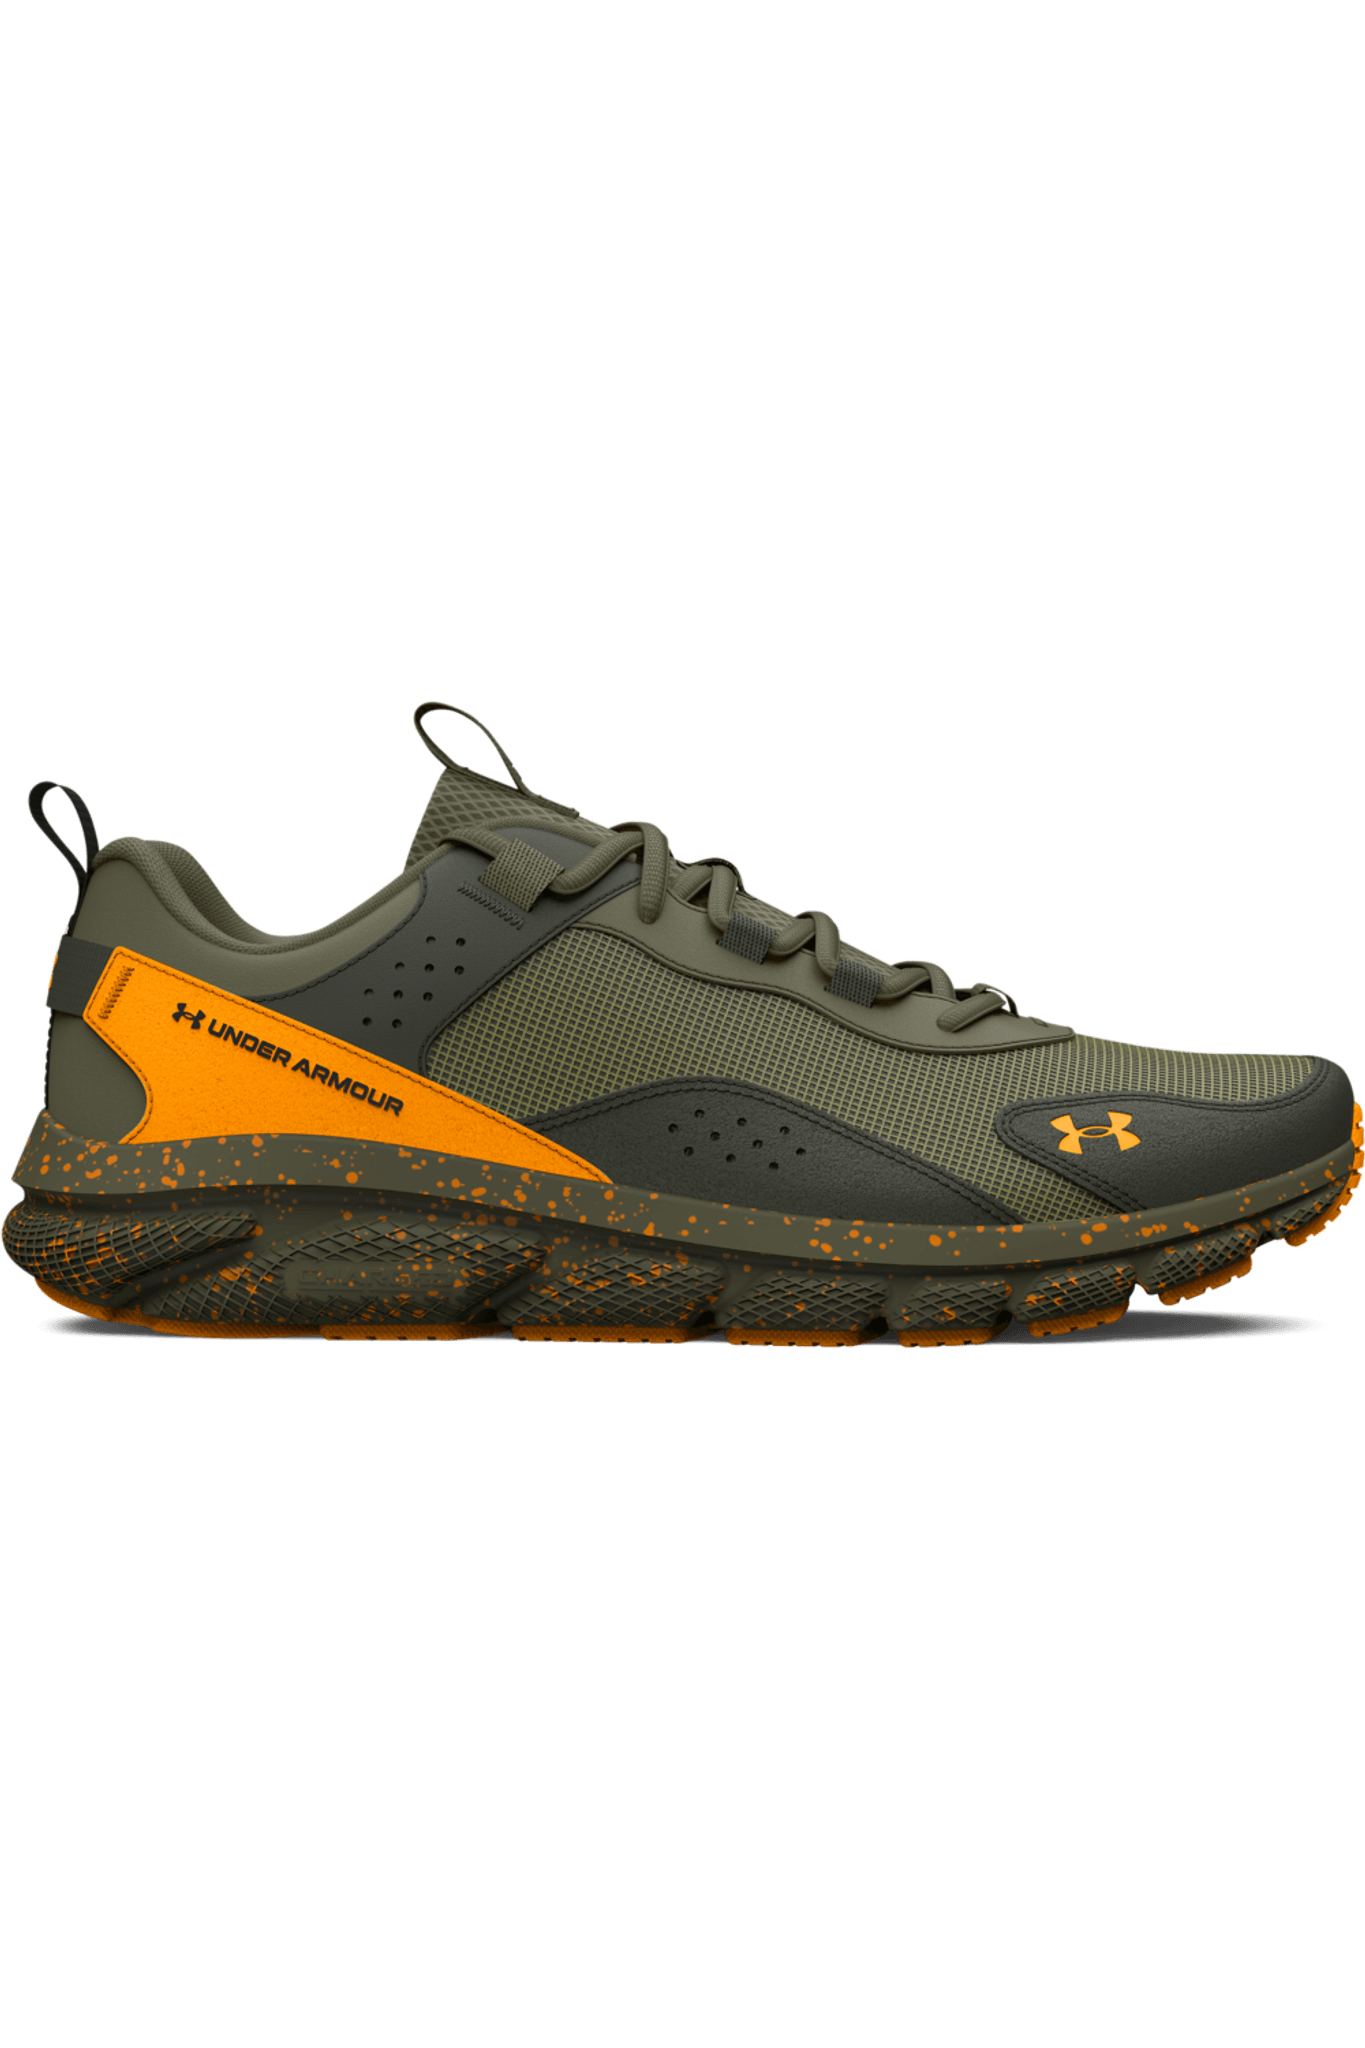 Under Armour Charged Verssert Speckle. Hombre